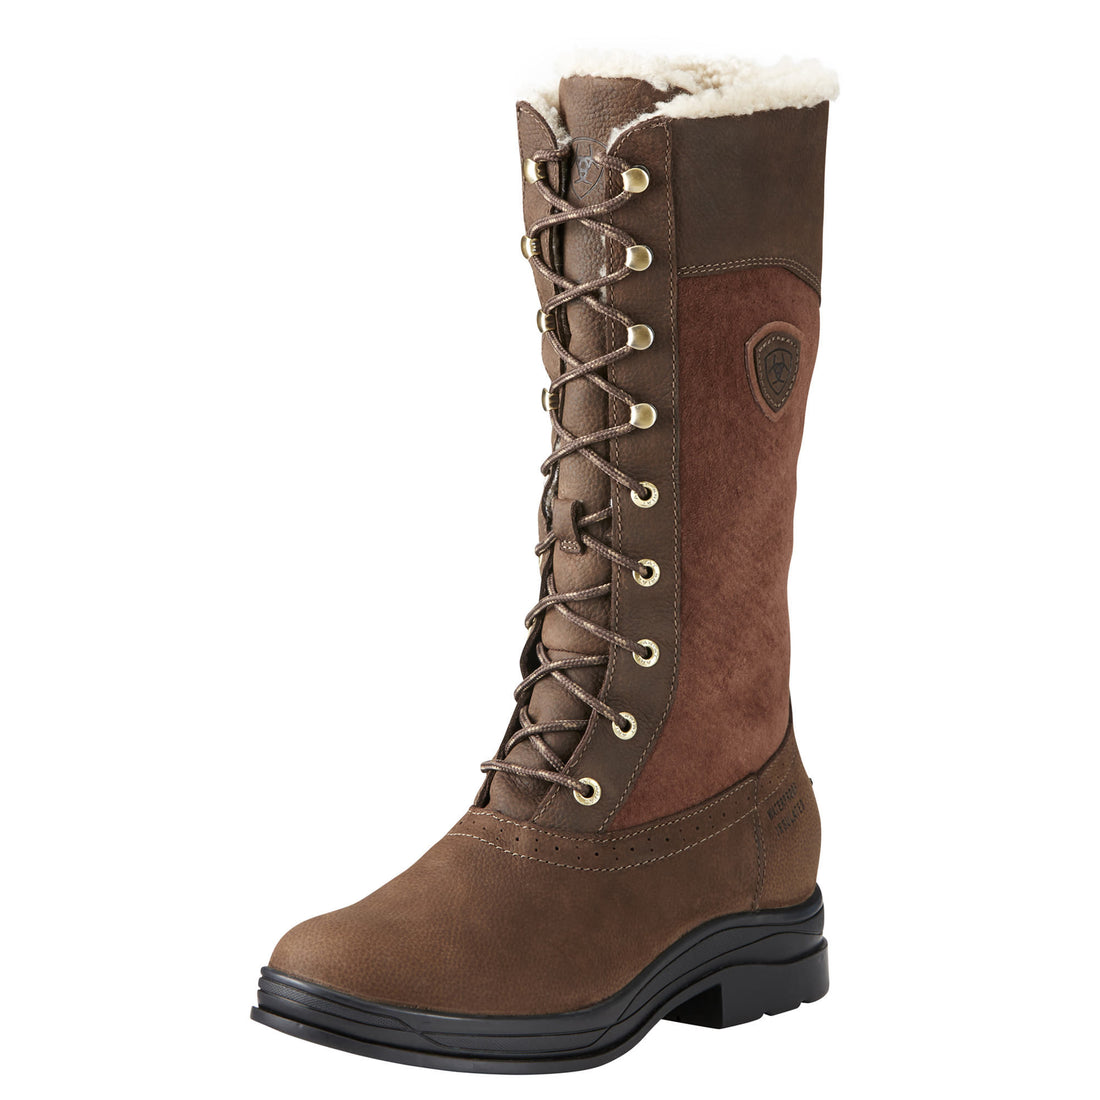 Wythburn H20 Insulated Boot for Ladies - Java